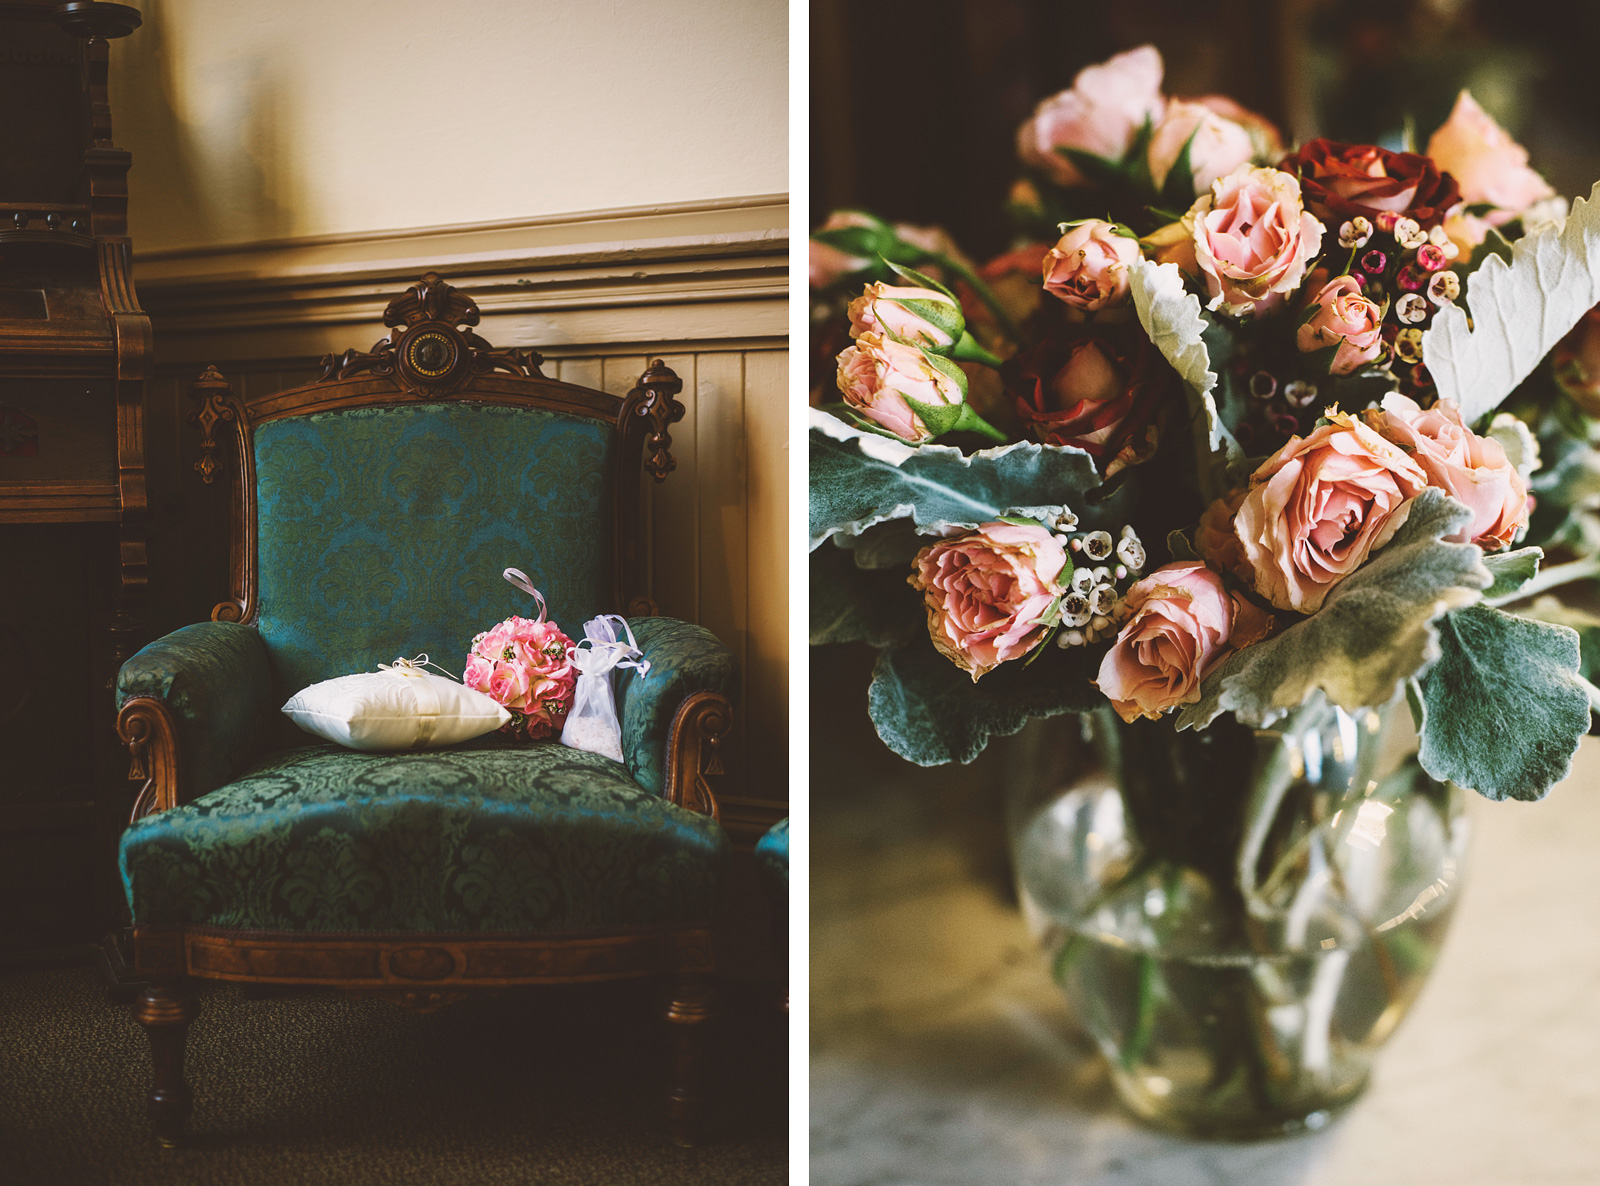 Ring Bearer's Pillow and Bride's Bouquet sitting on a velvet chair | Old Church Wedding Photos